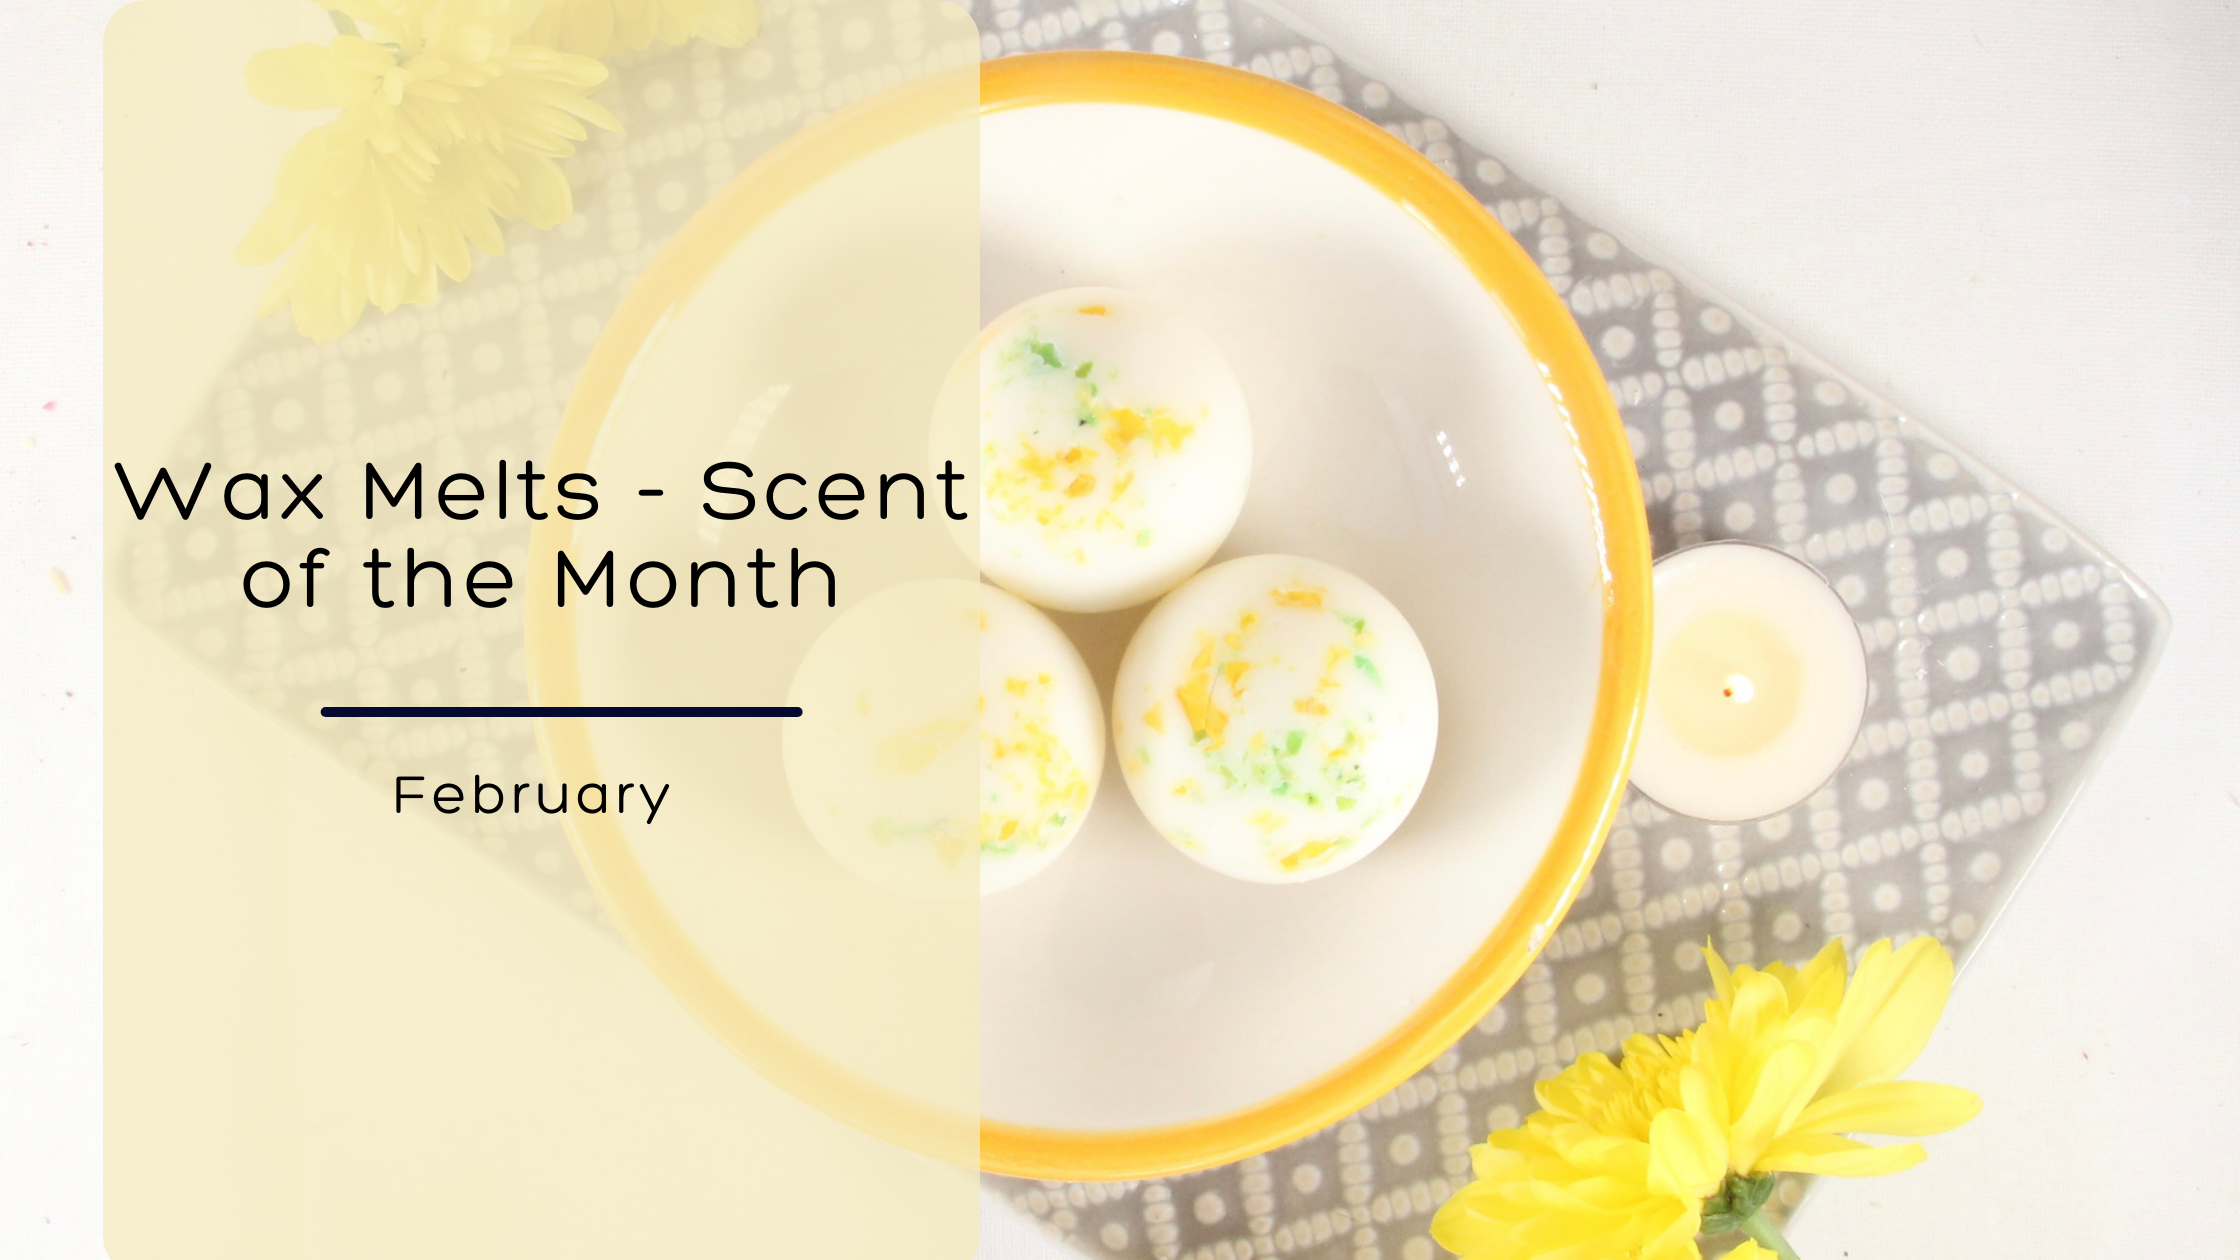 Scented Wax Melts - Scent of the Month